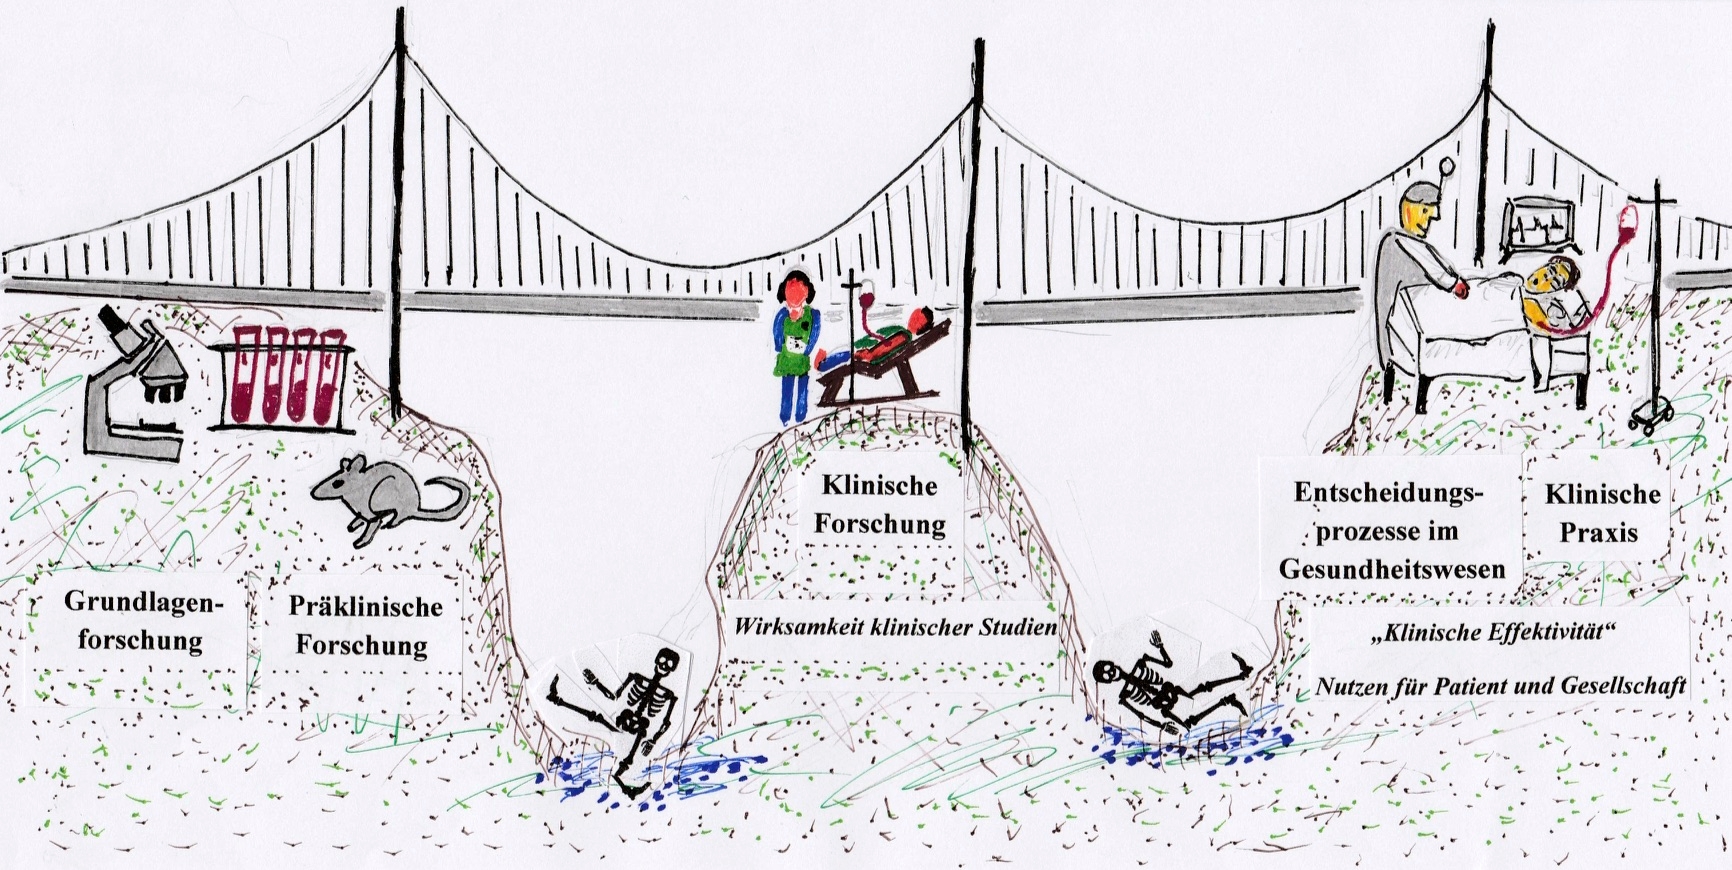 Translational cancer research is able to bridge the valley of death. The drawing shows a bridge spanning the two valleys of death in medical research - one between preclinical and clinical research and another between the clinical efficacy of drugs as dem